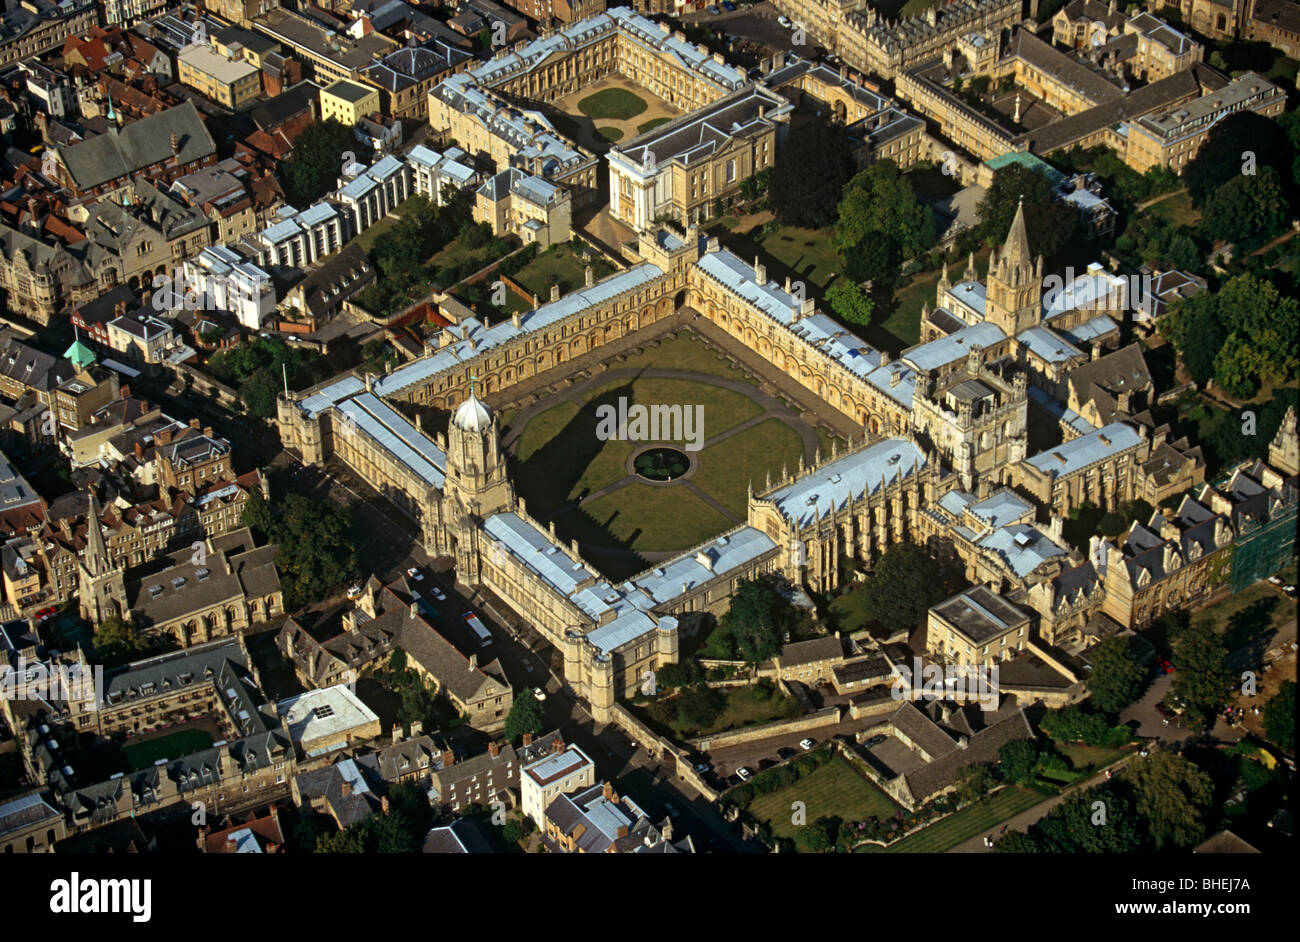 Christchurch college oxford from the air, Oxford, England Stock Photo